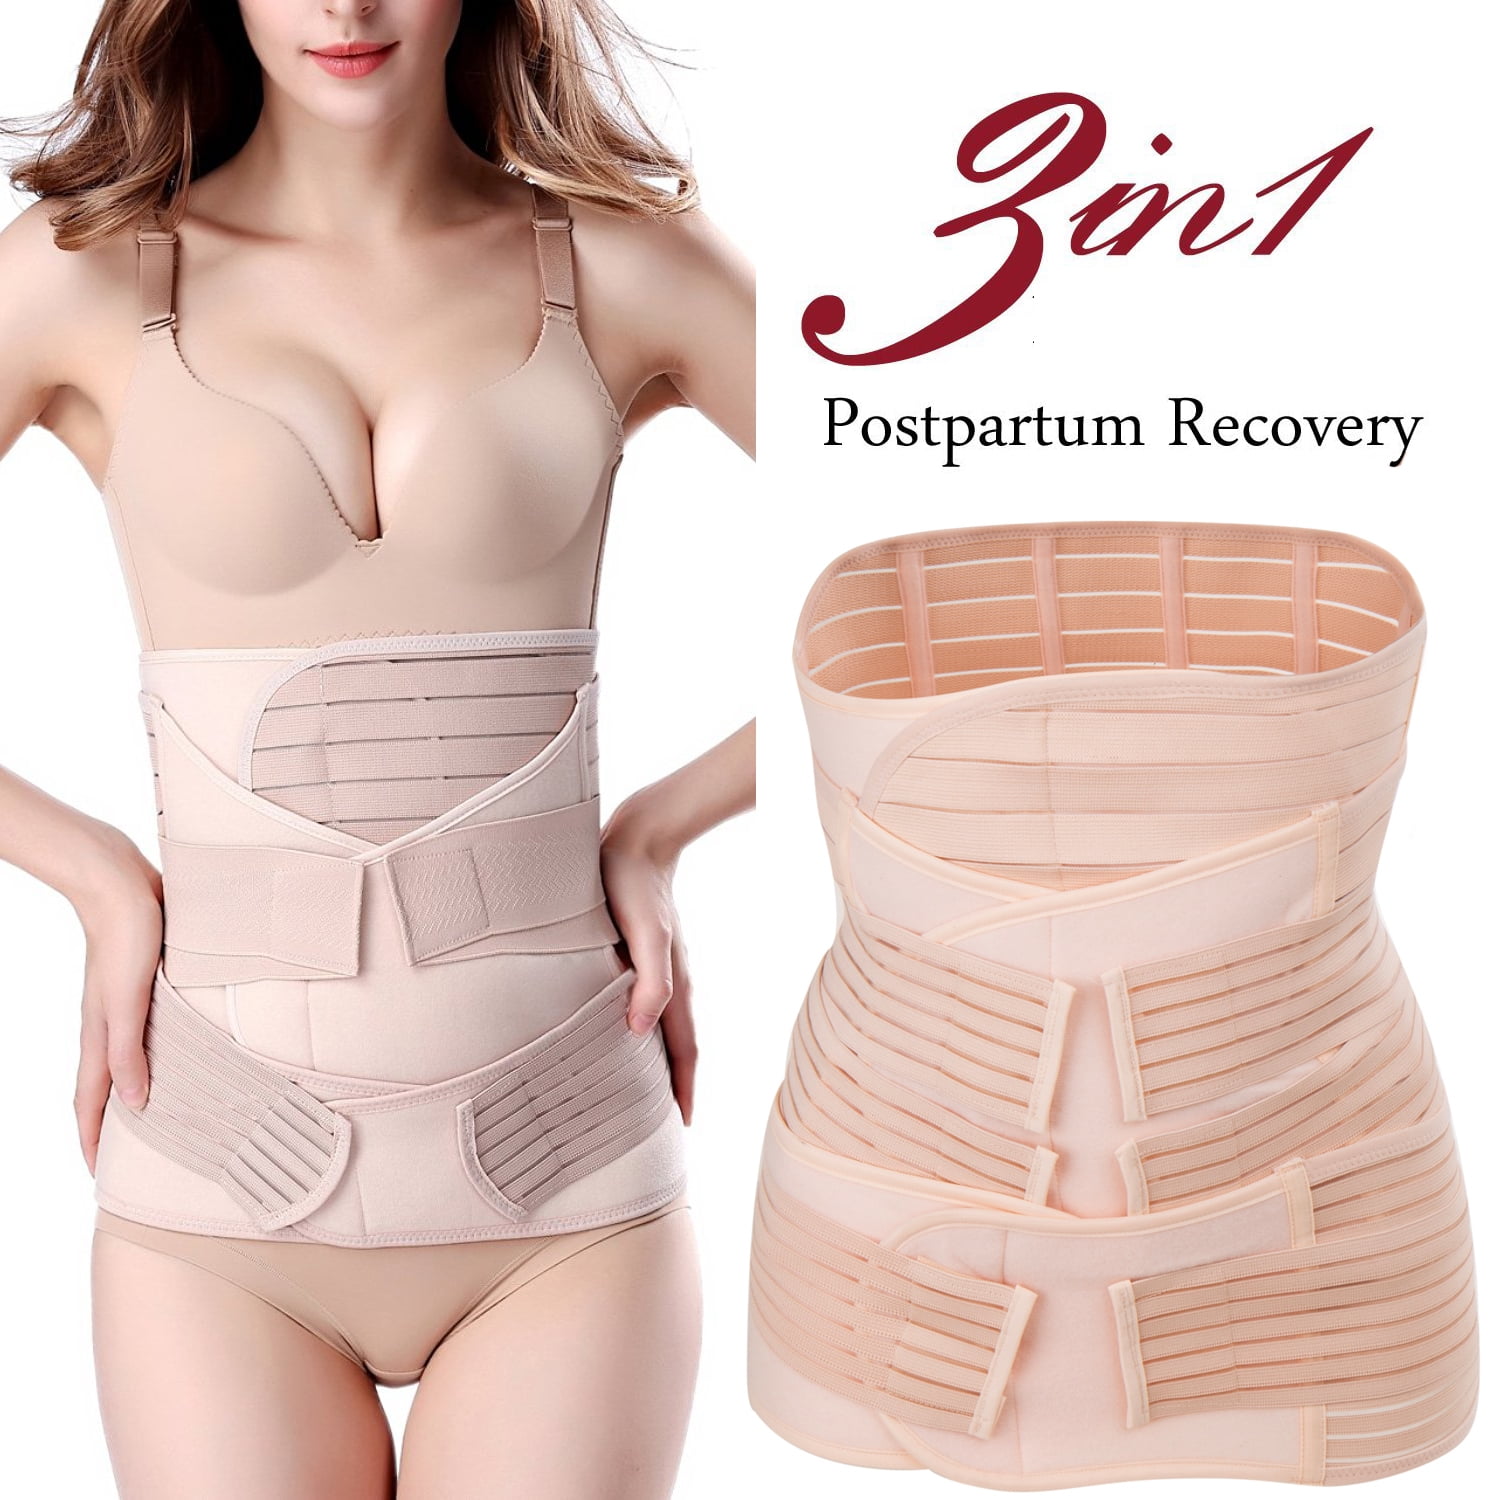 3 In 1 Postpartum Support Recovery Belly/Waist Pelvis Belt Body, Miss Moly  Plus Size Postpartum Support Band Belly Wrap Girdle 